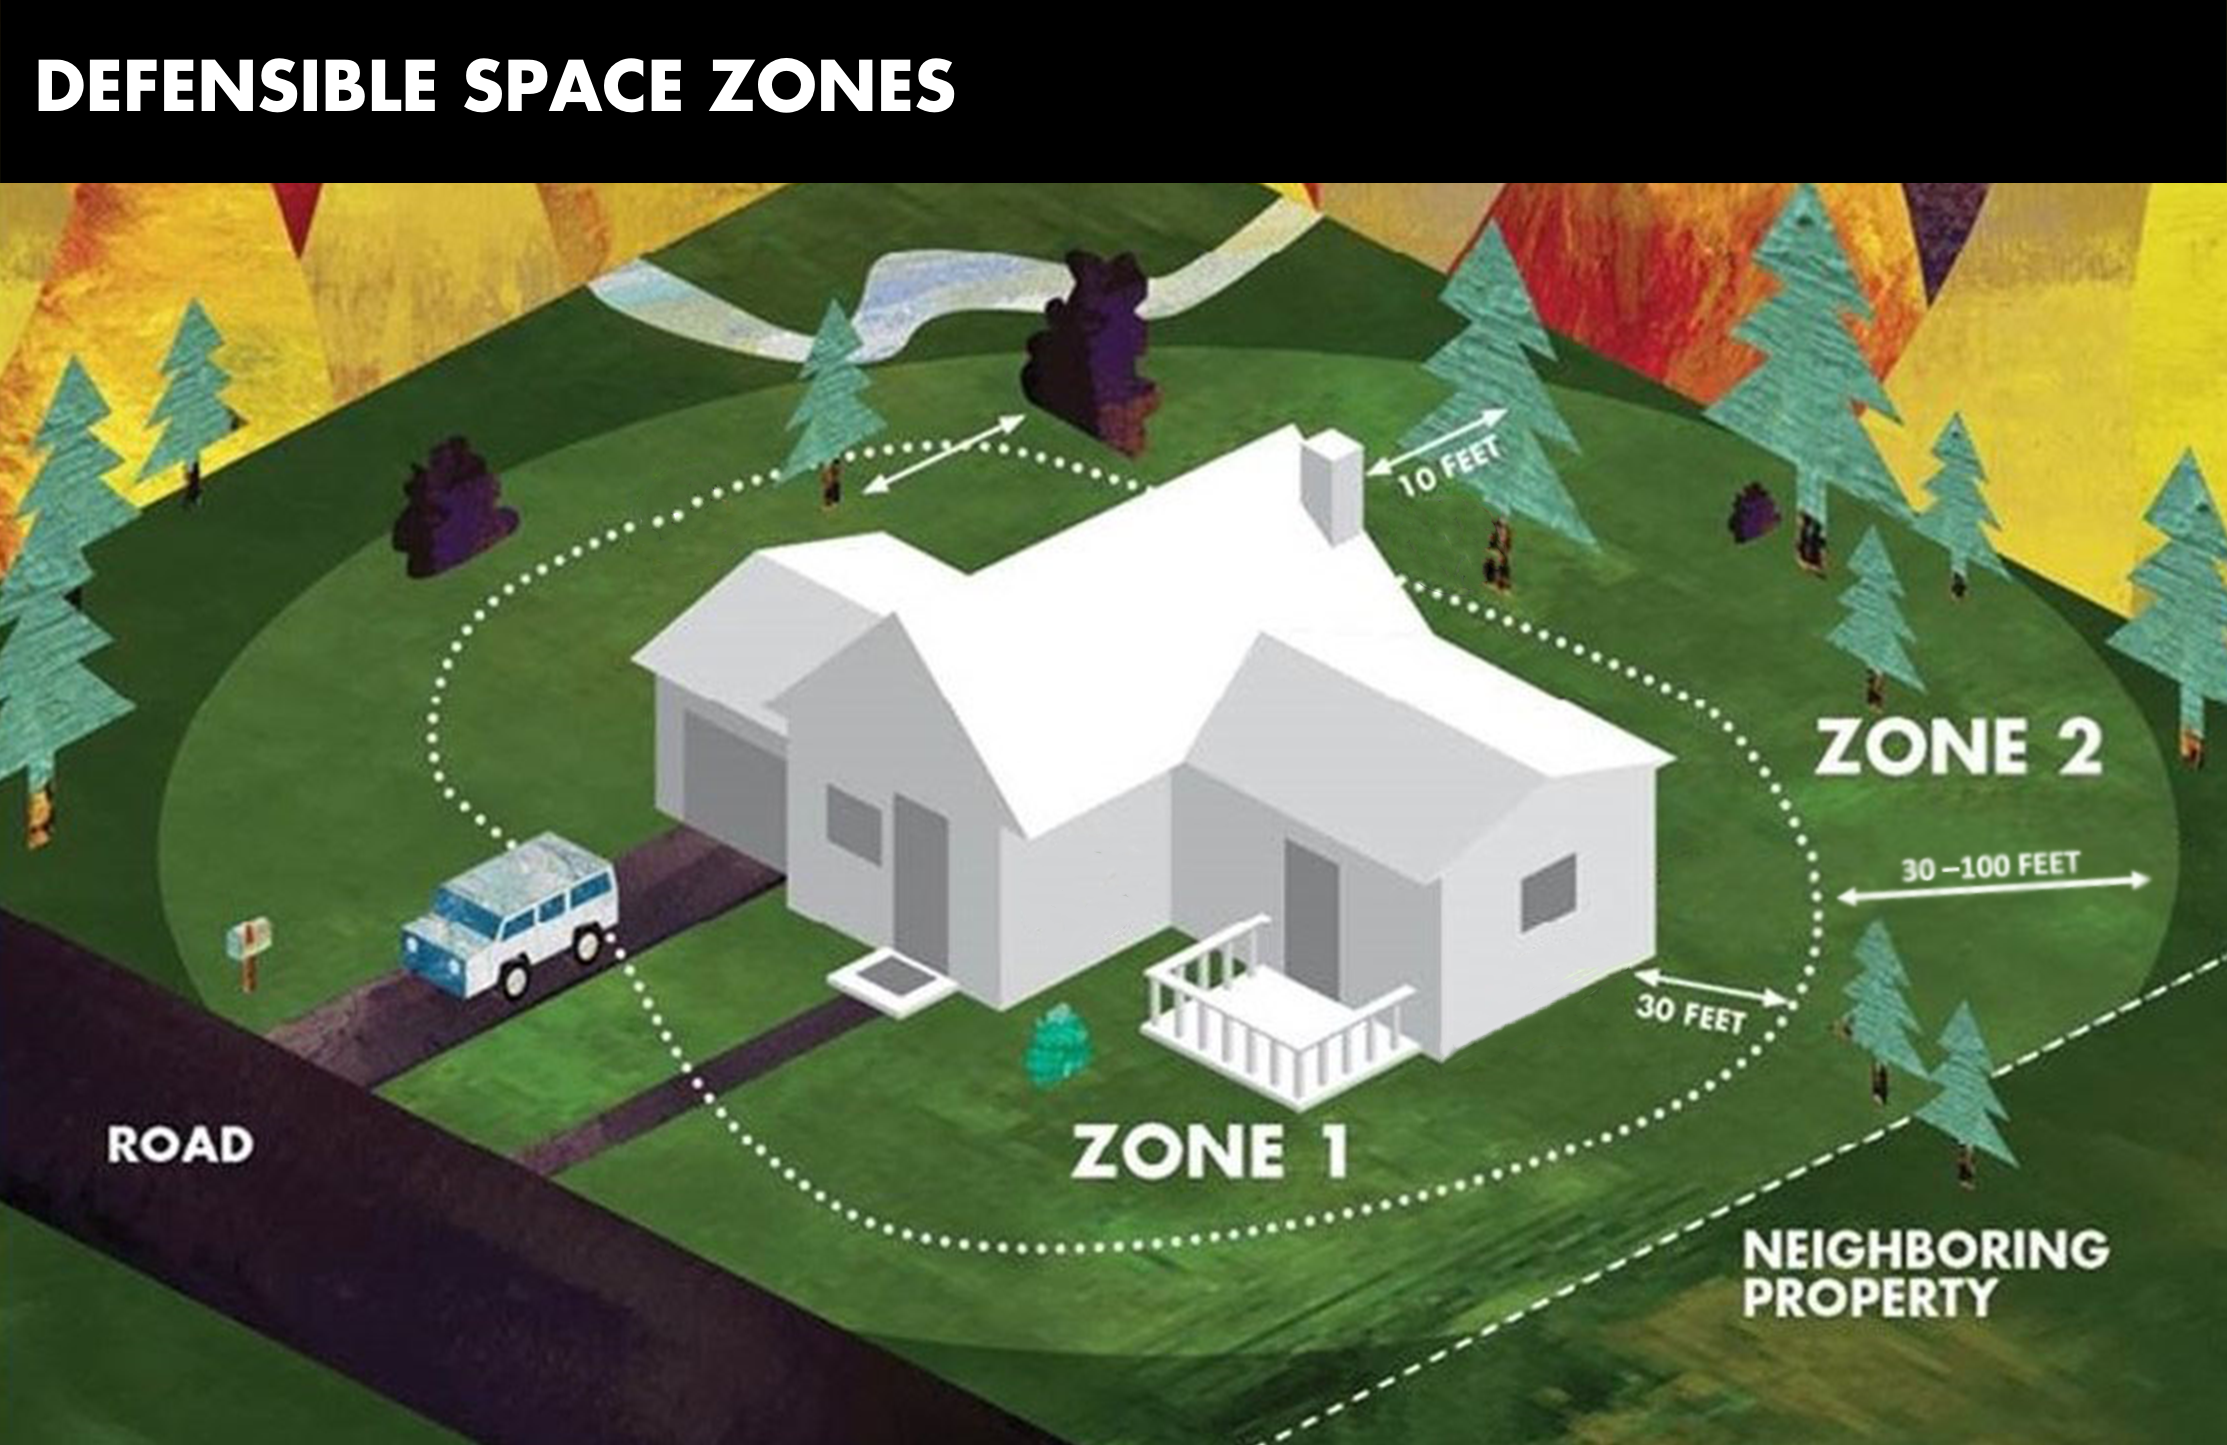 CAL Fire Defensible Space Zones